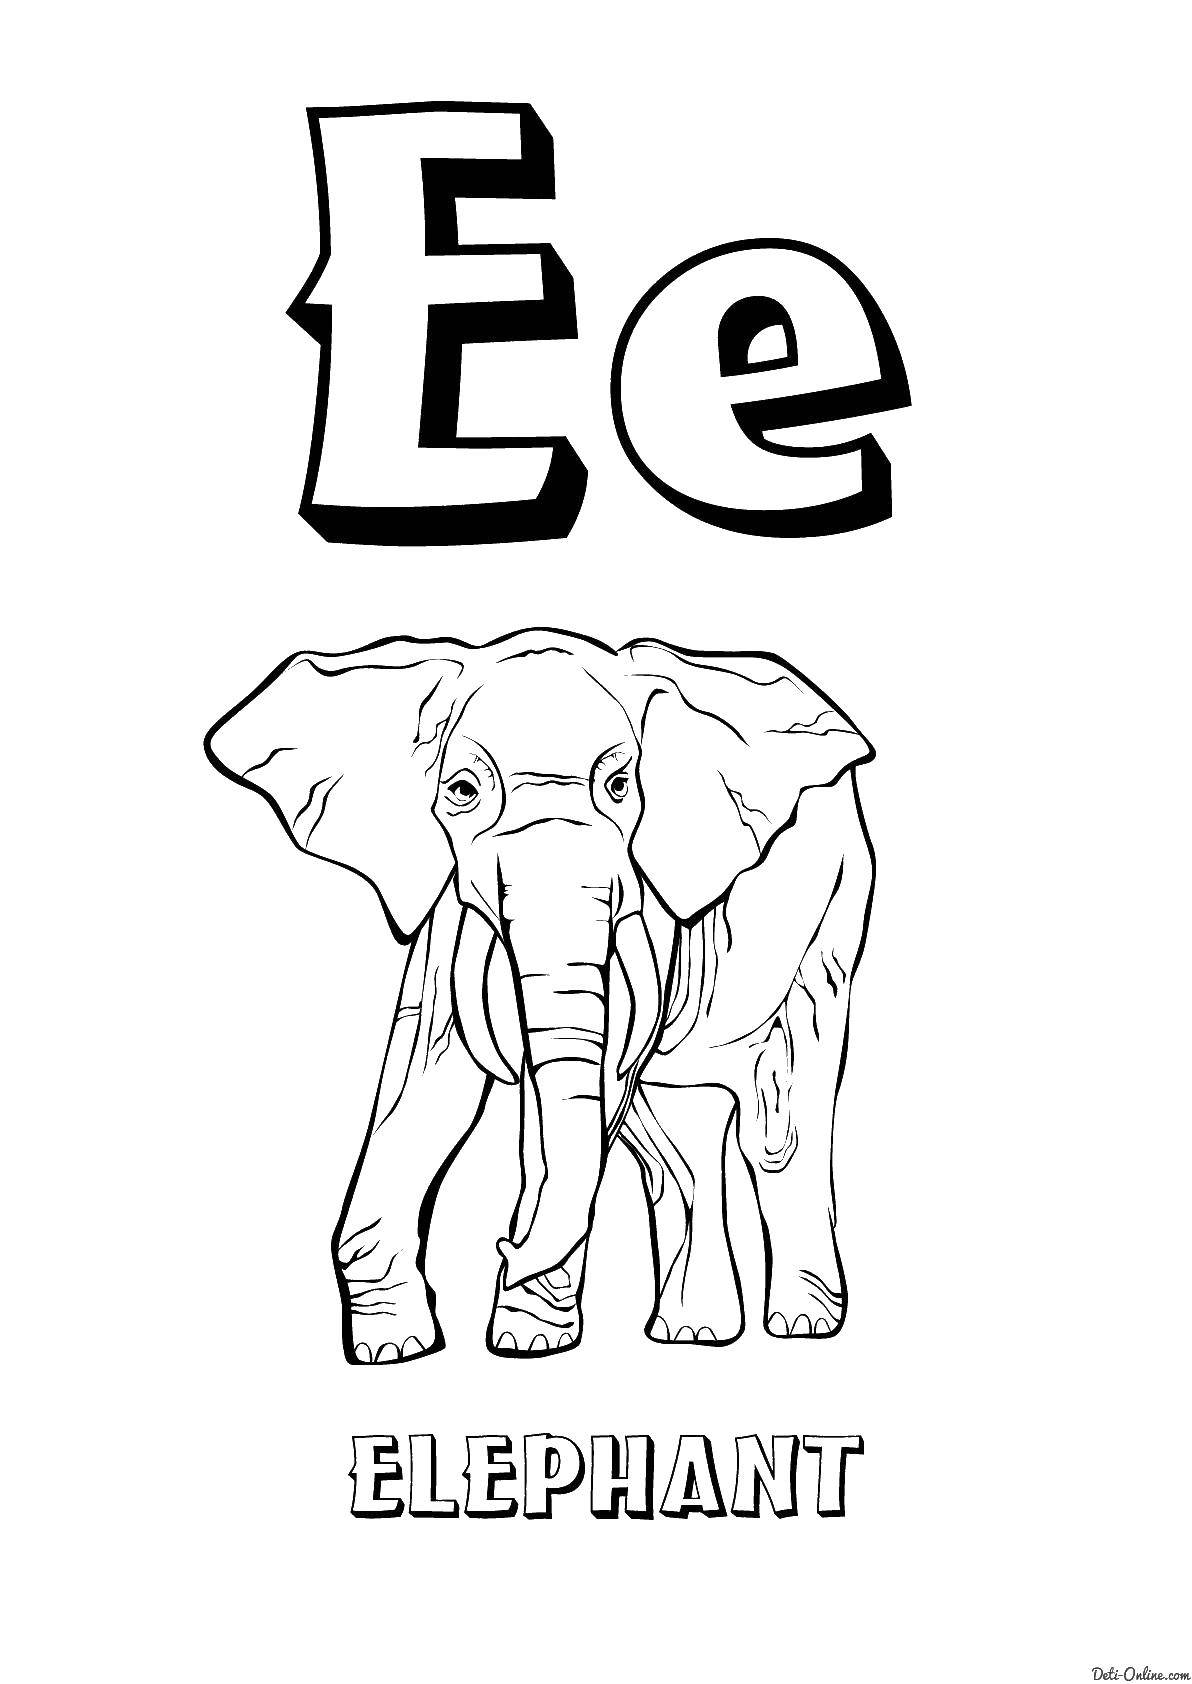 Coloring English alphabet. Category English. Tags:  The alphabet, letters, words.